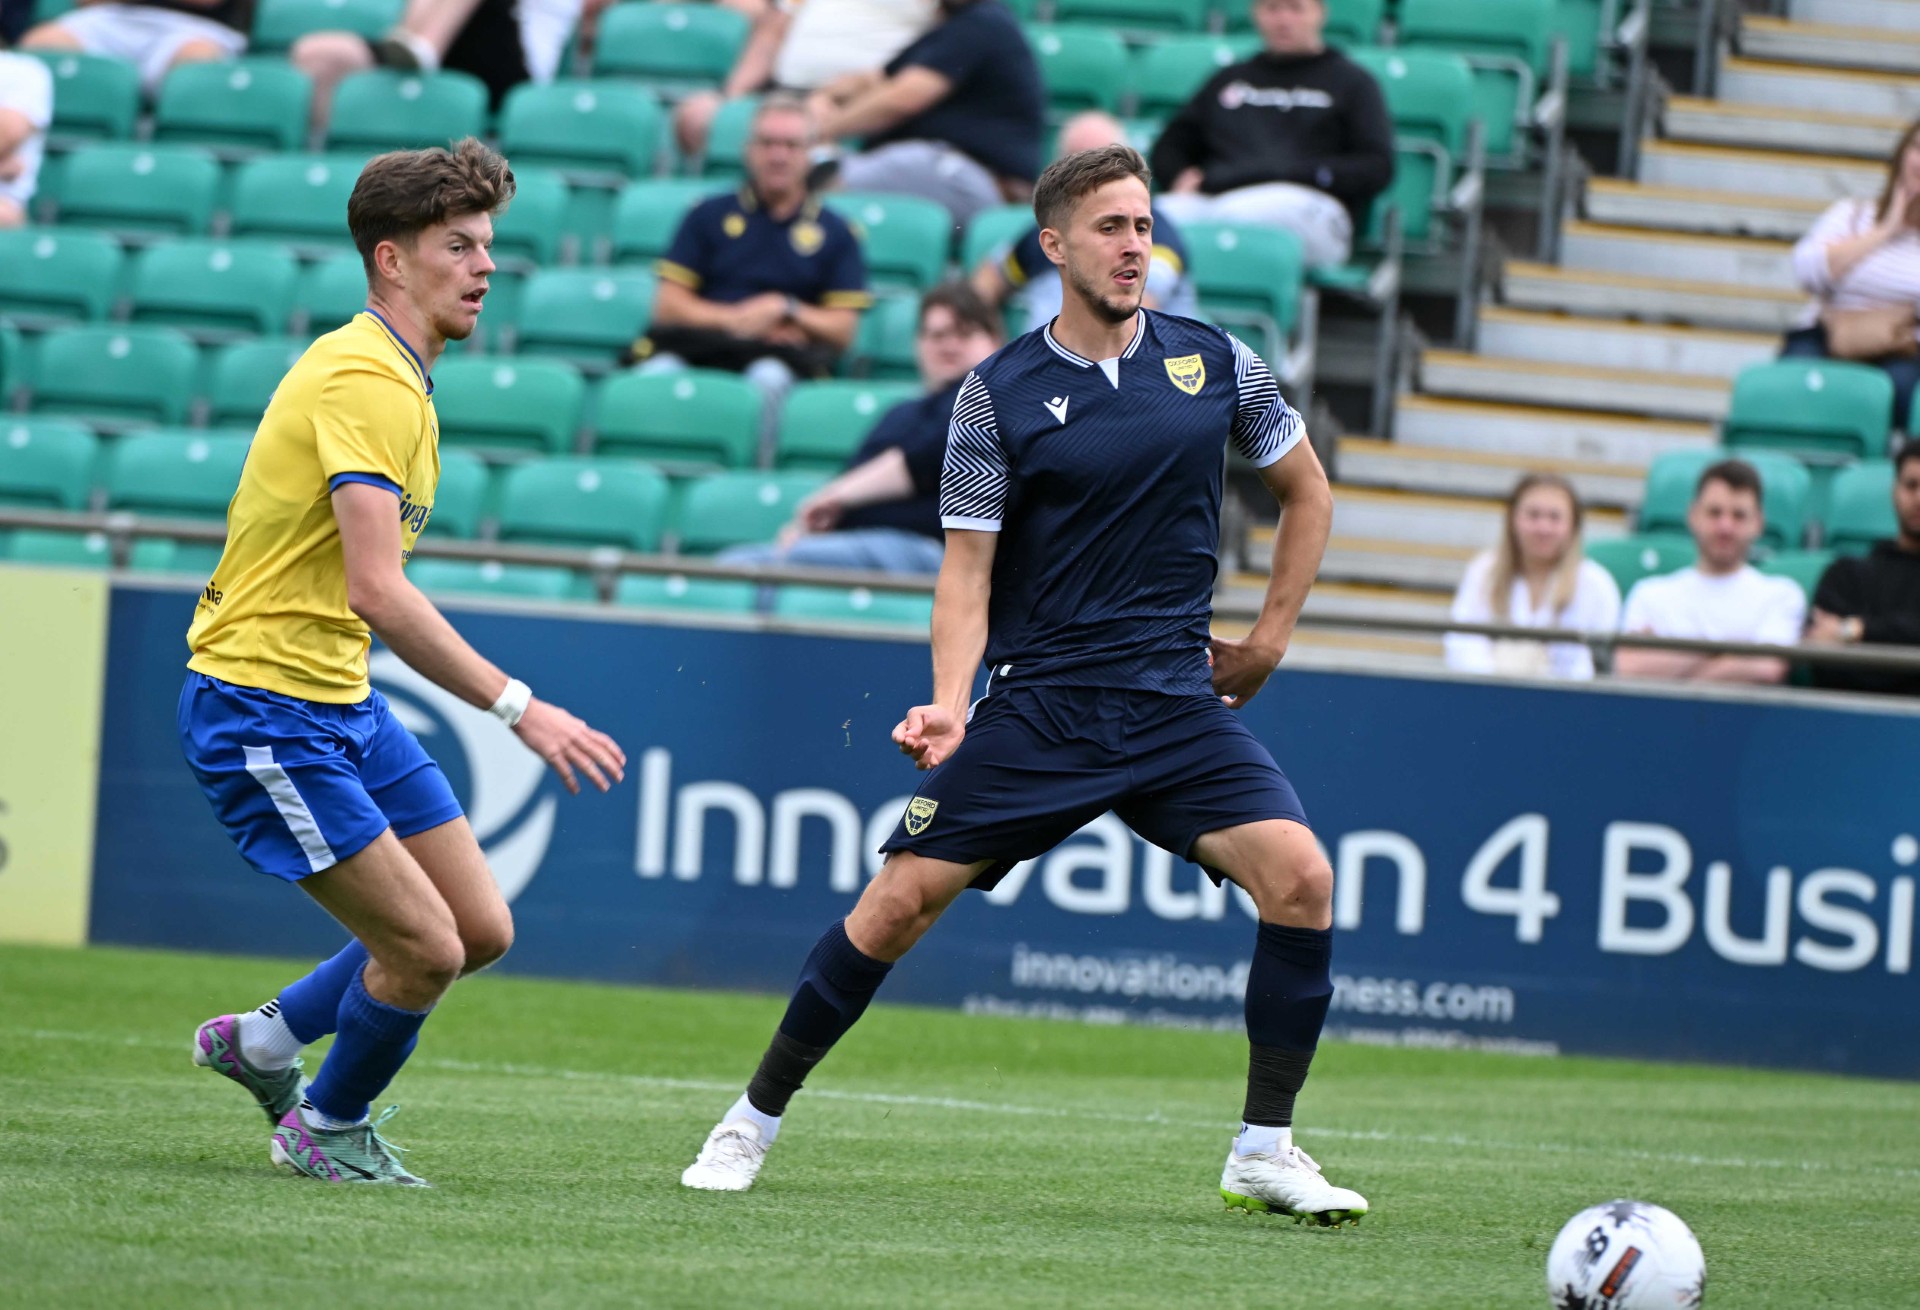 Oxford United midfielder previews Southampton and Palermo